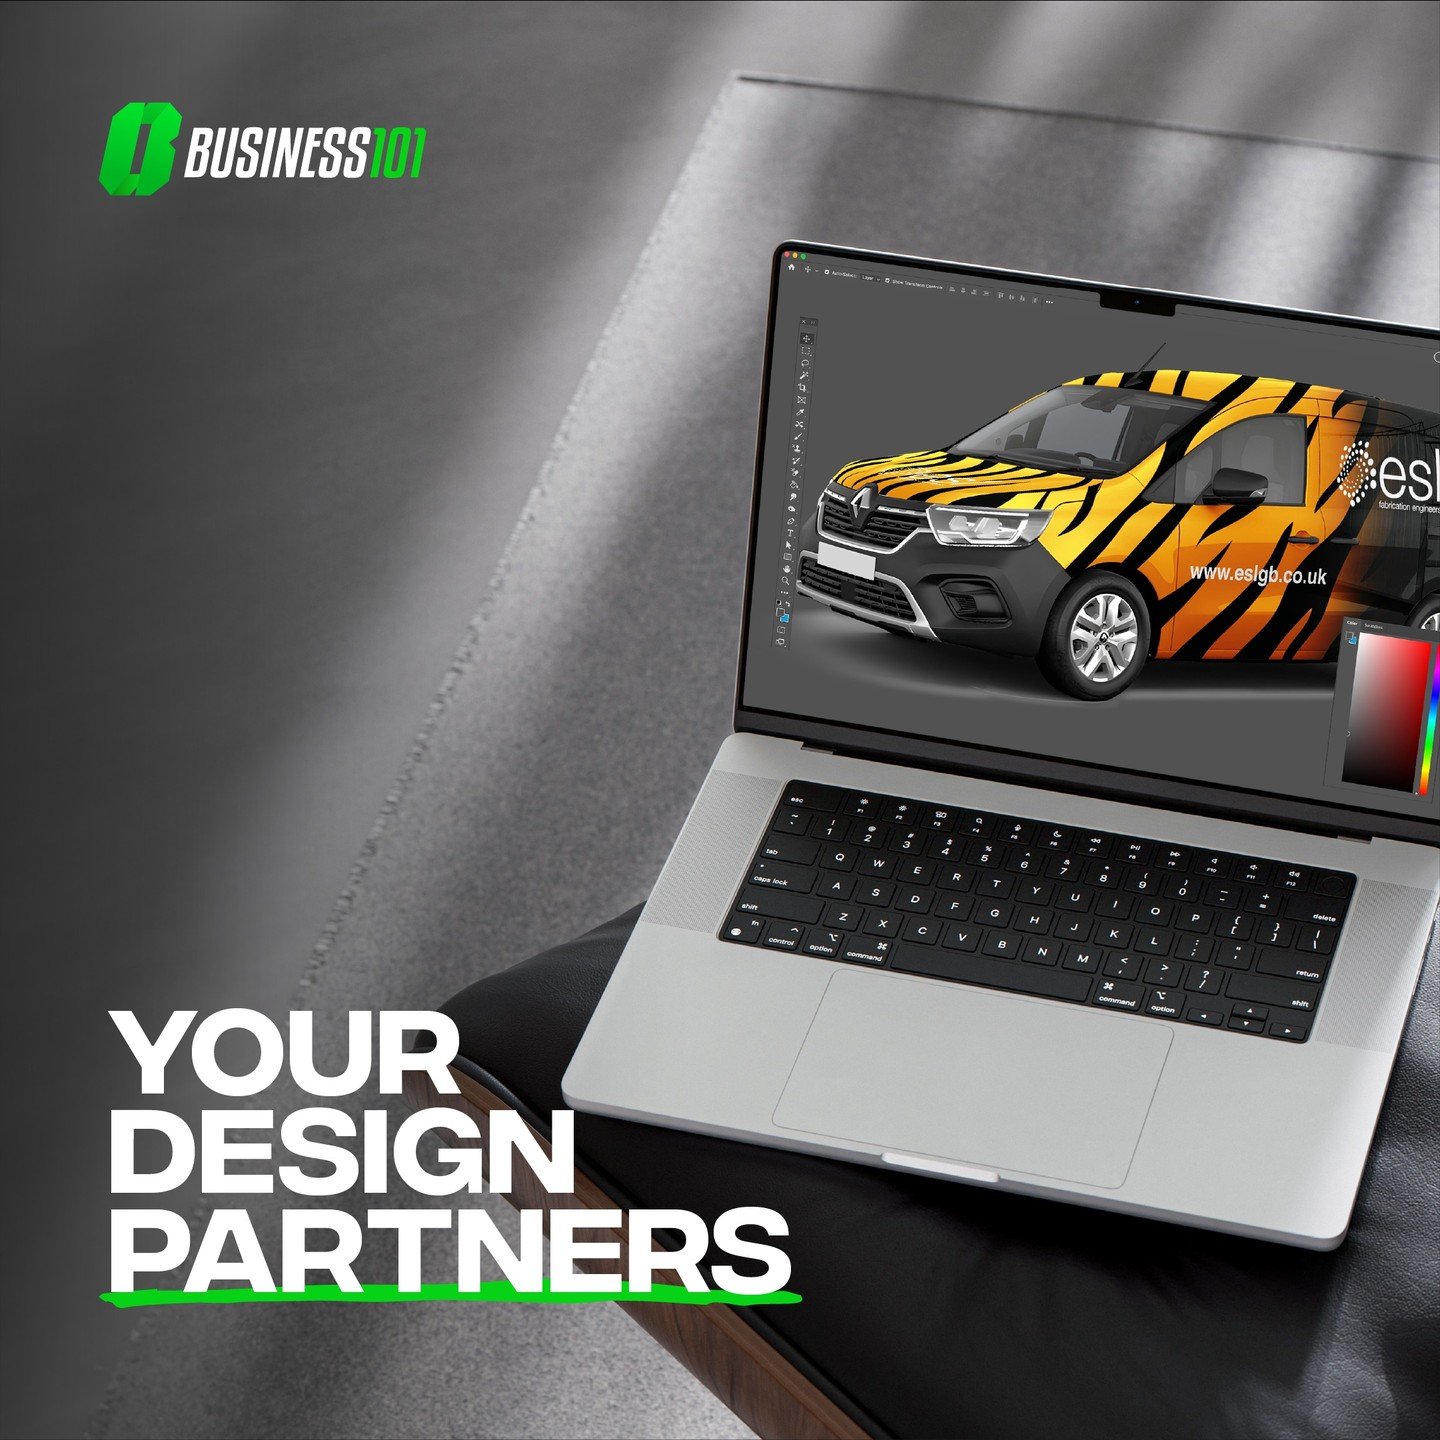 📣 Did you know? 📣

At Business 101, we offer FREE designs for your vehicle livery, always!

You don't have to commit until you're truly in love with your concepts. It's all about finding the perfect fit for your brand. 

Reach out today and let's d